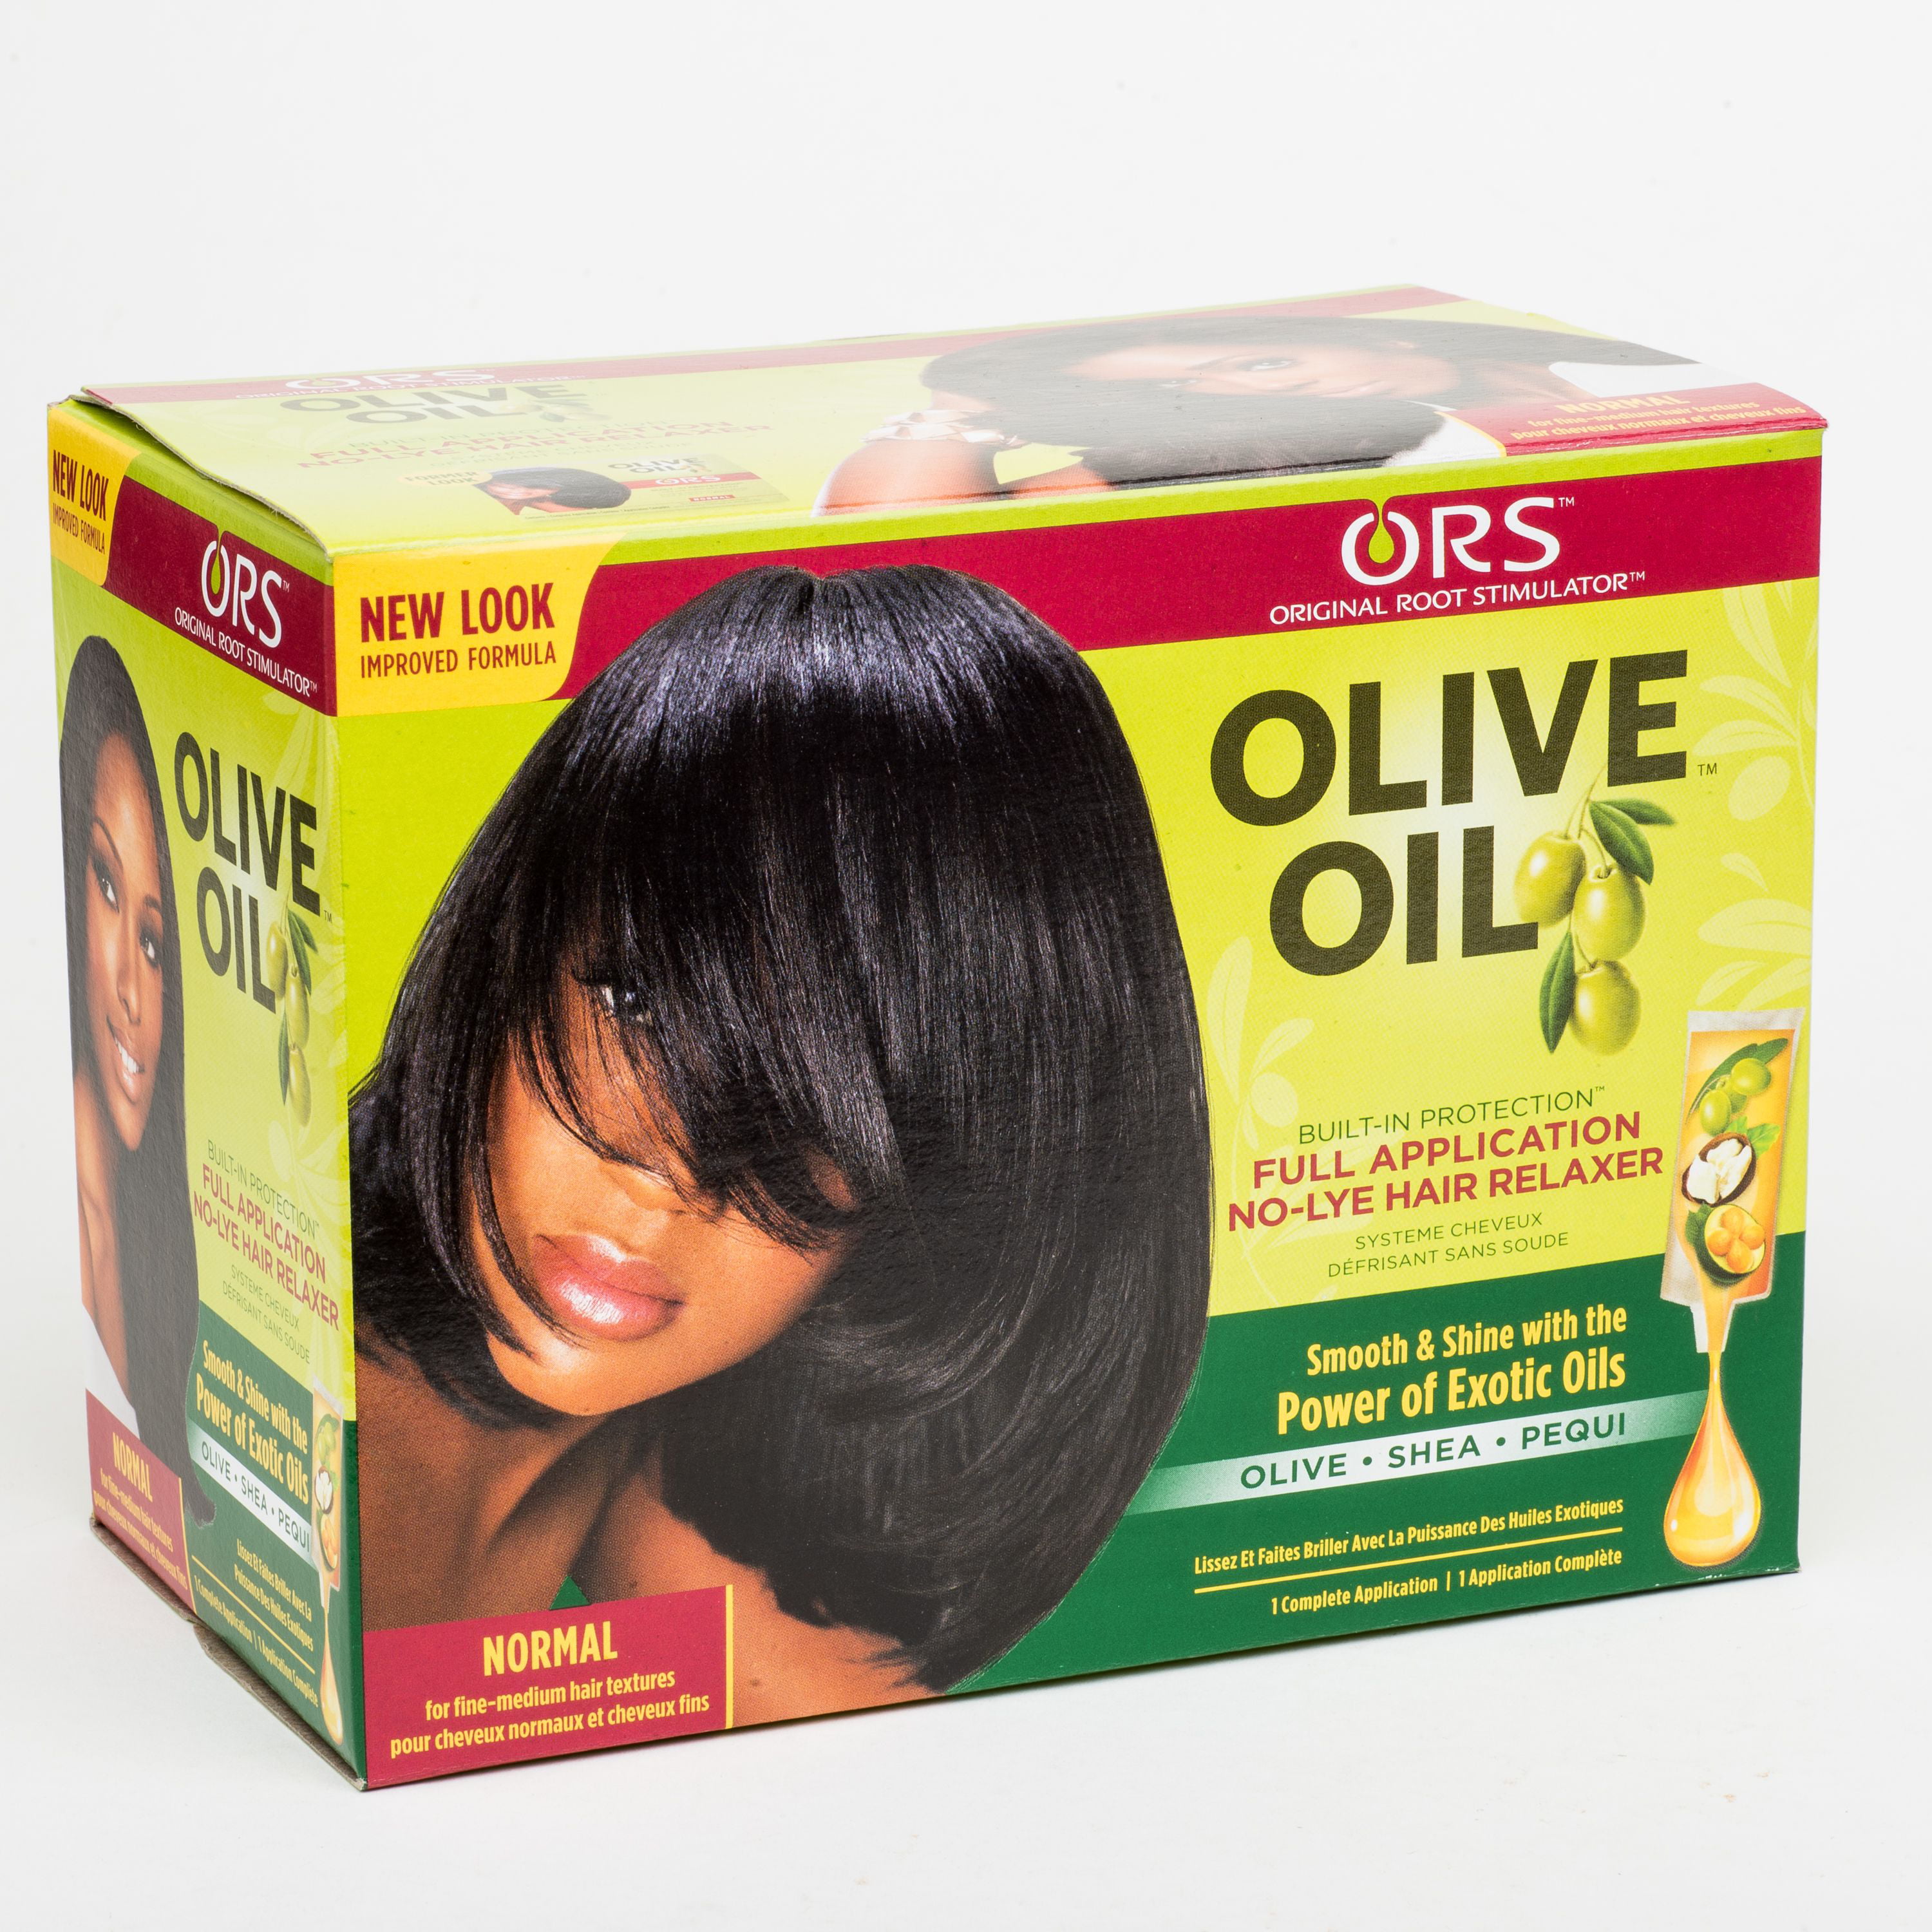 ORS Olive Oil Built-in Protection Full Application No-Lye Hair Relaxer -  Normal Strength 